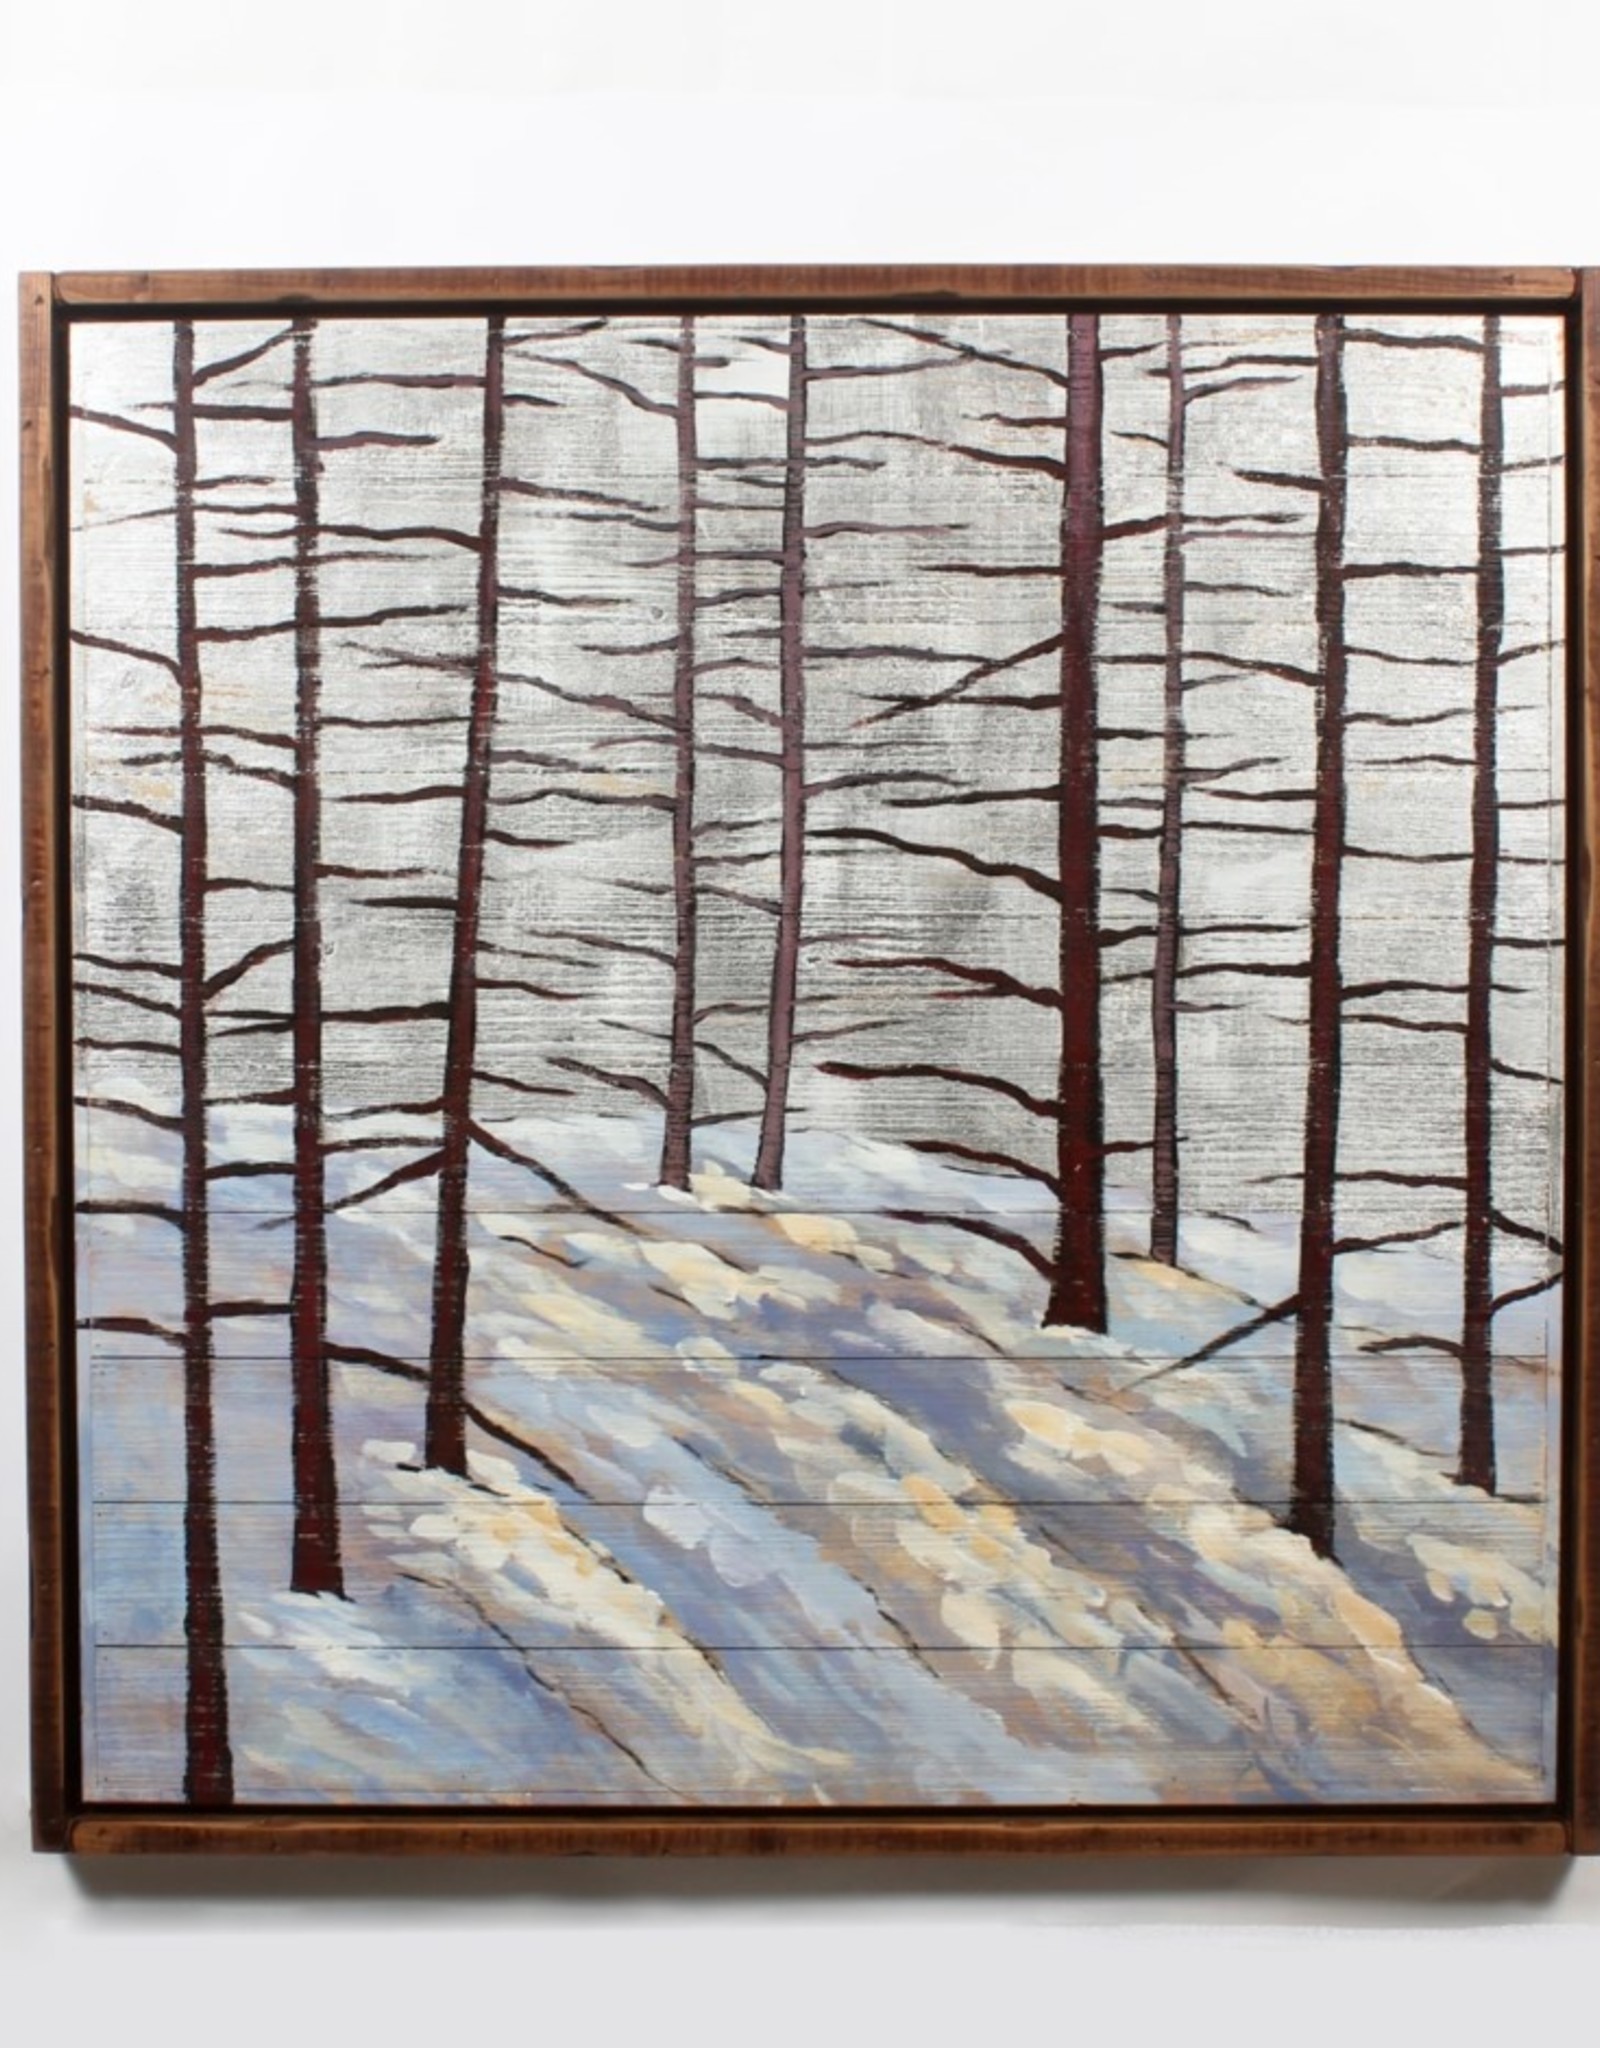 Art CJ Winter Forest Painted on Wood BM250300